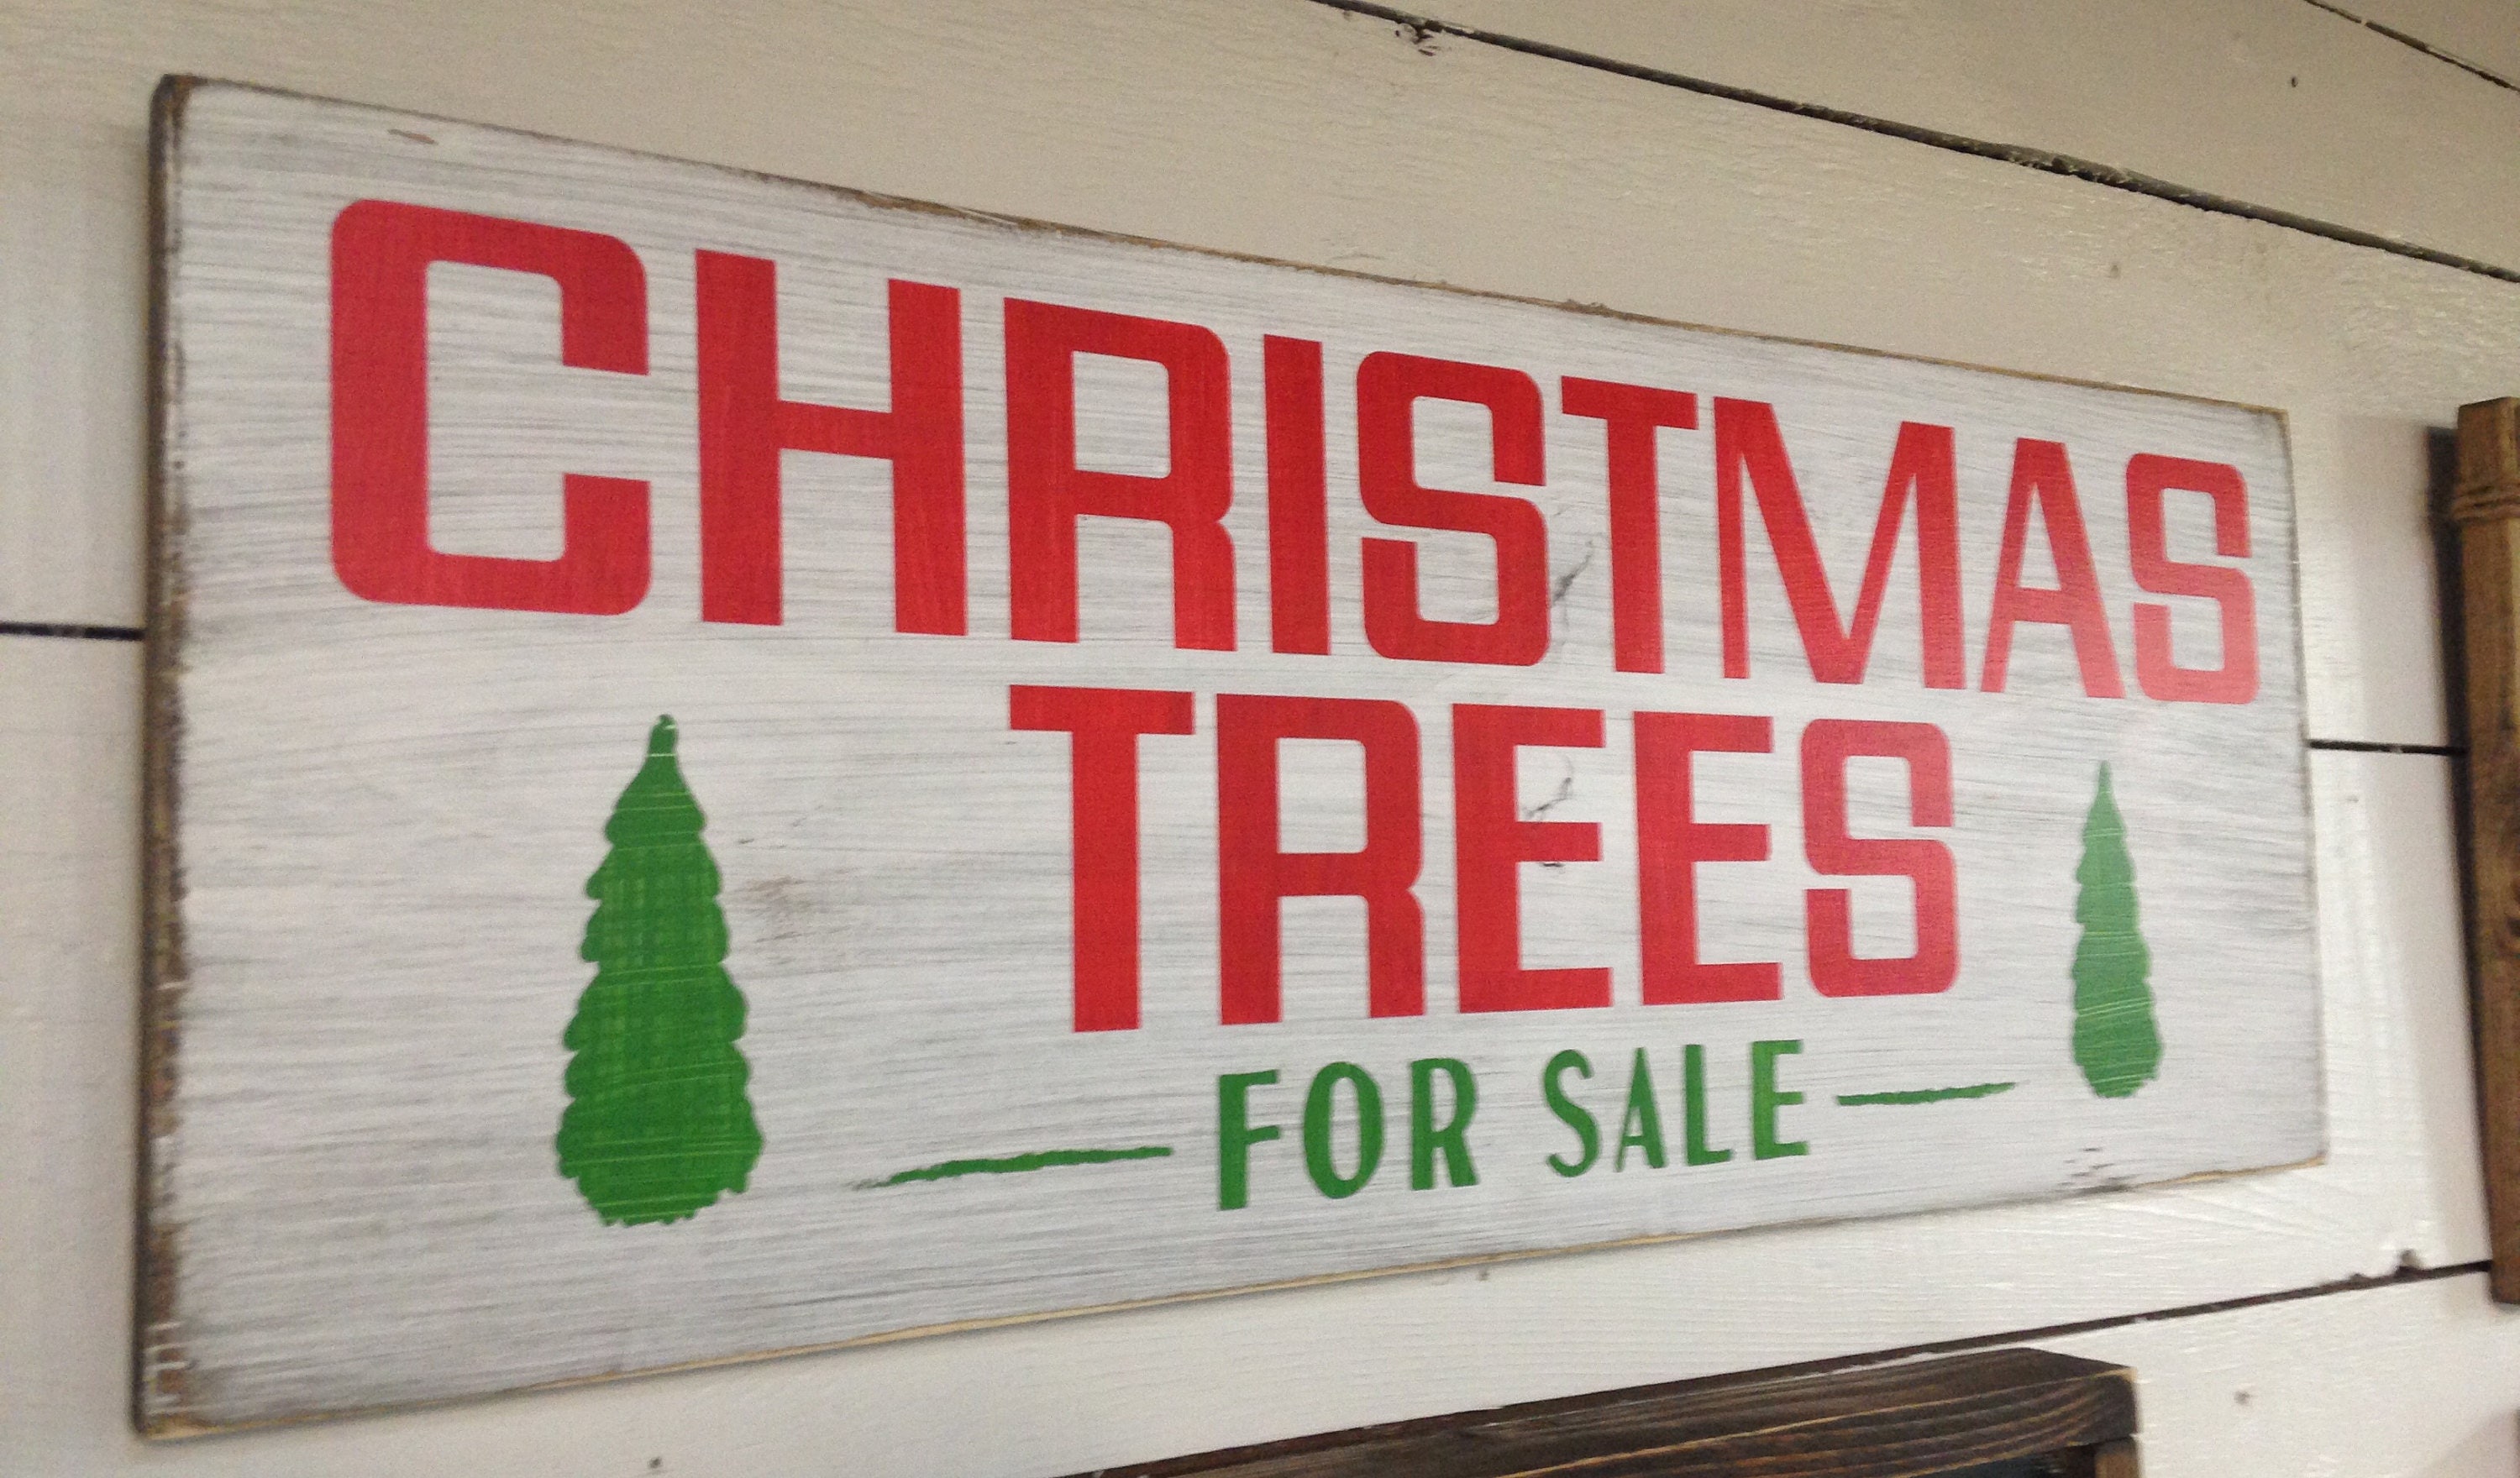 Christmas trees for sale painted wood sign. Magnolia market | Etsy